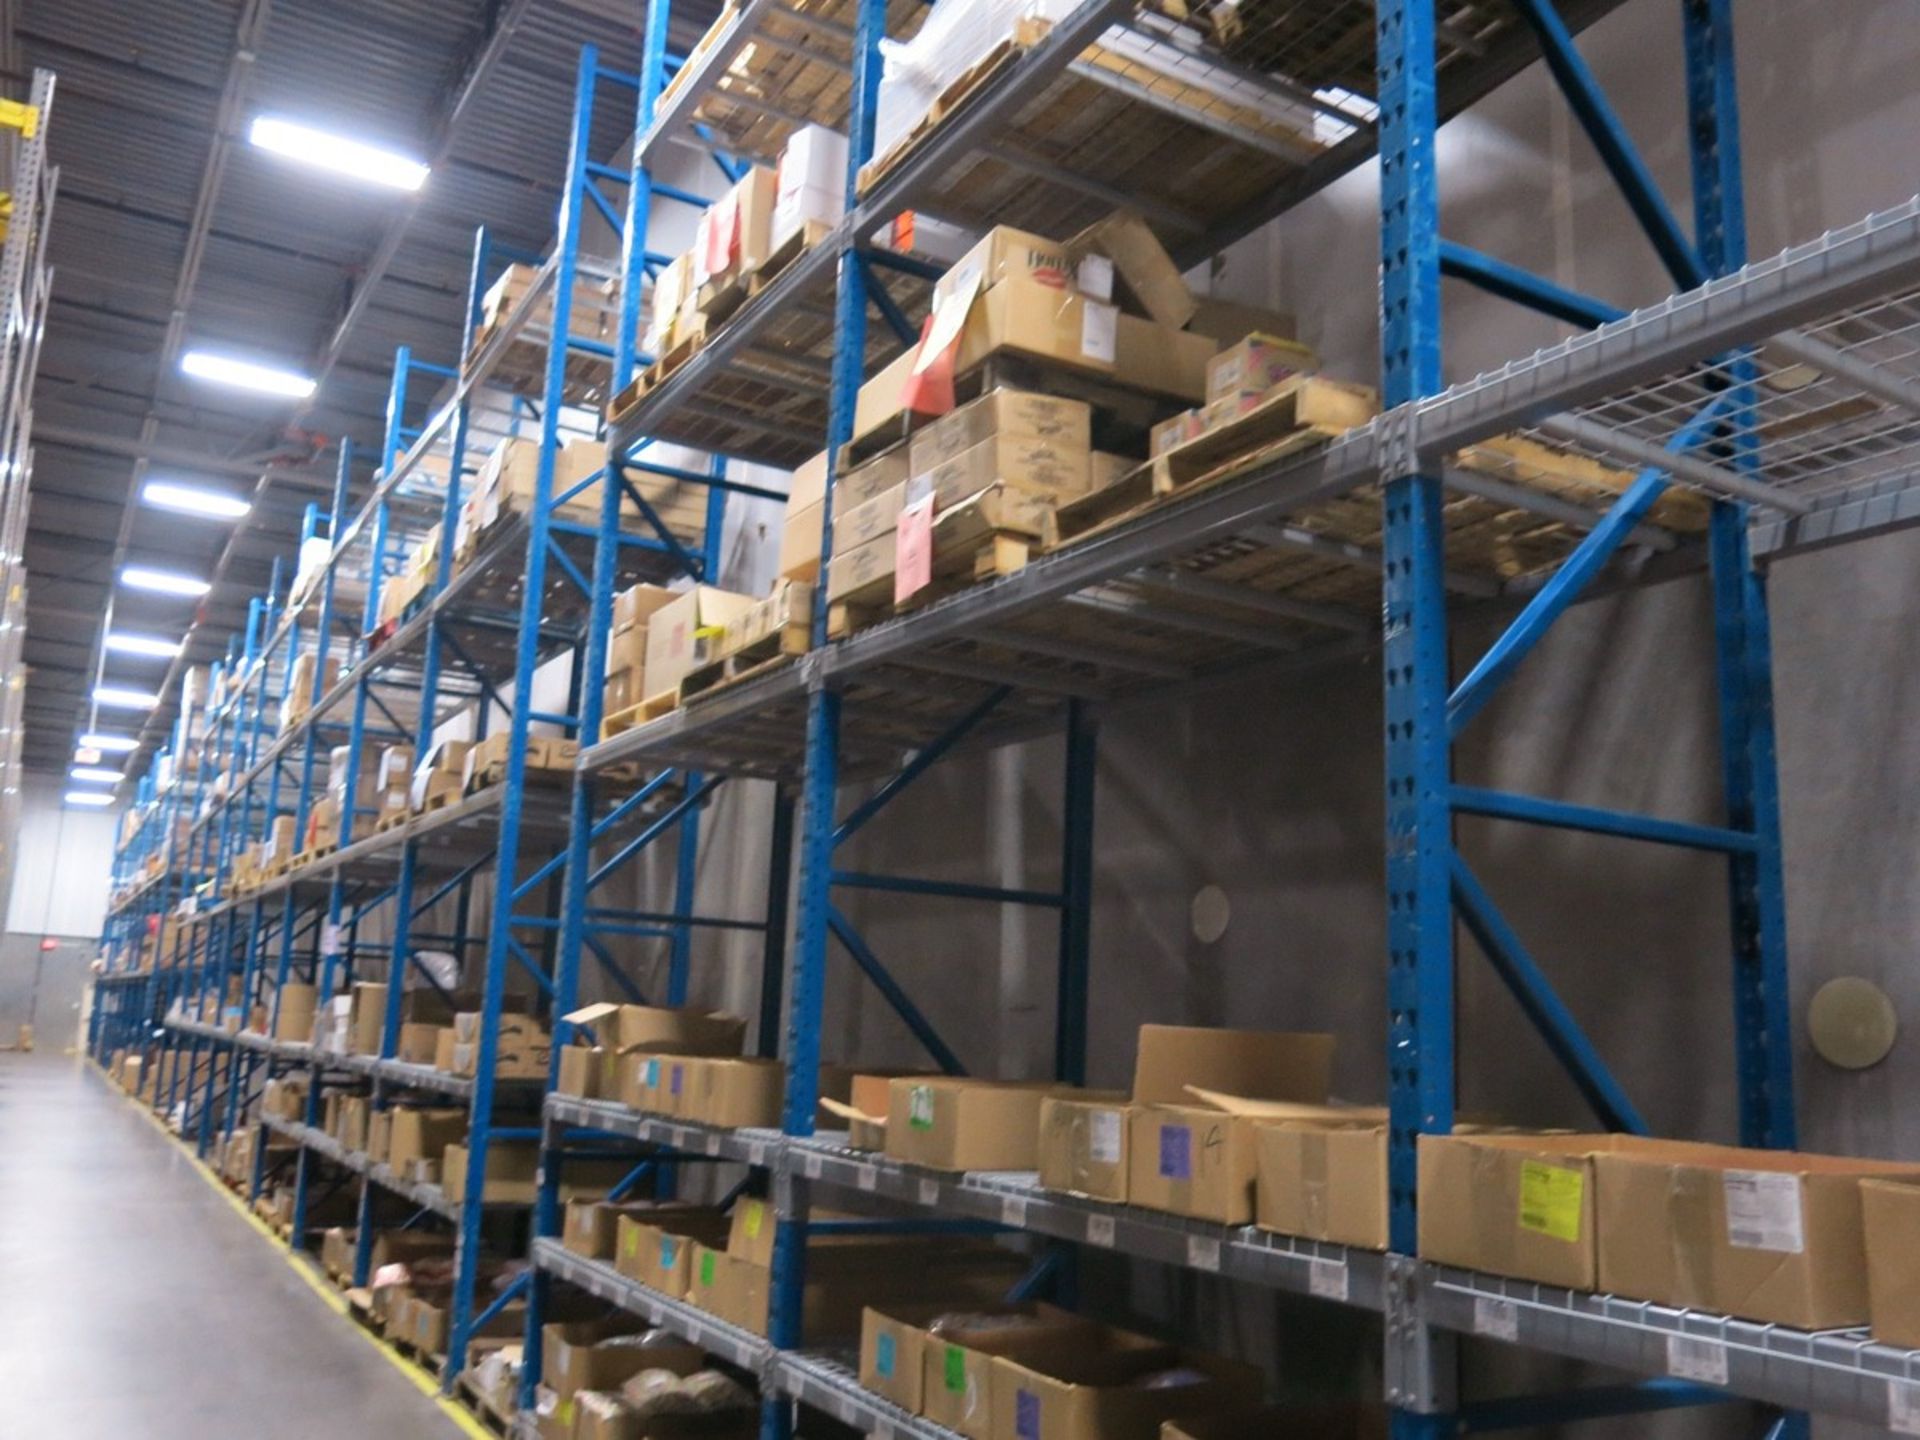 (21) Sections of Tear Drop Style Pallet Racking, with (24) Appr - Sub to Bulk | Rig Fee: See Desc